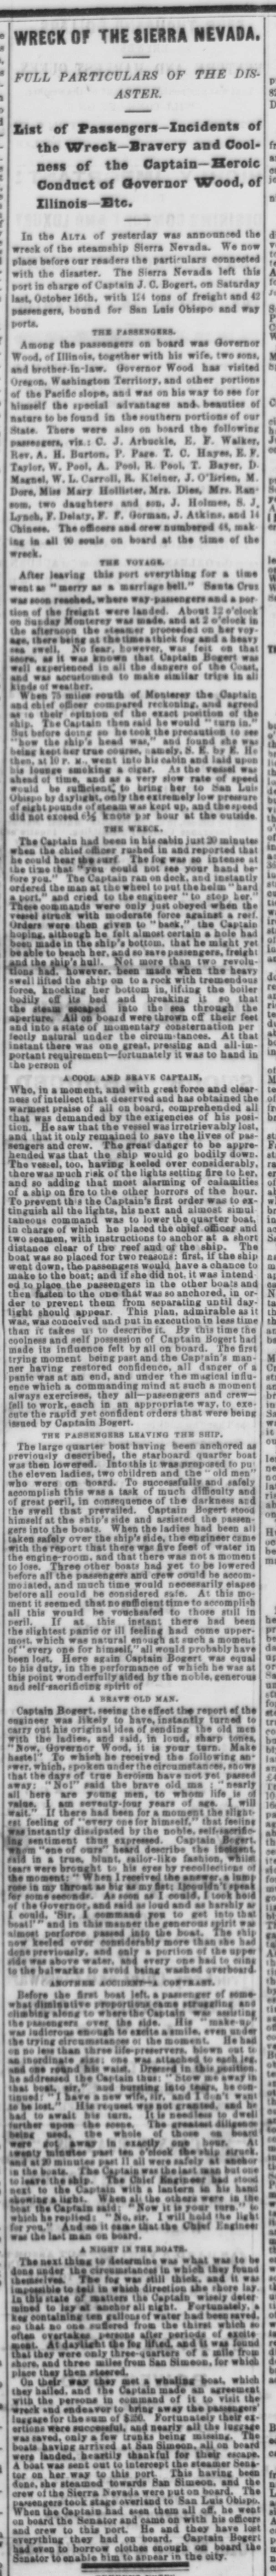 Newspaper clipping from Daily Alta California San Francisco 22OCT1869 of Sierra Nevada shipwreck